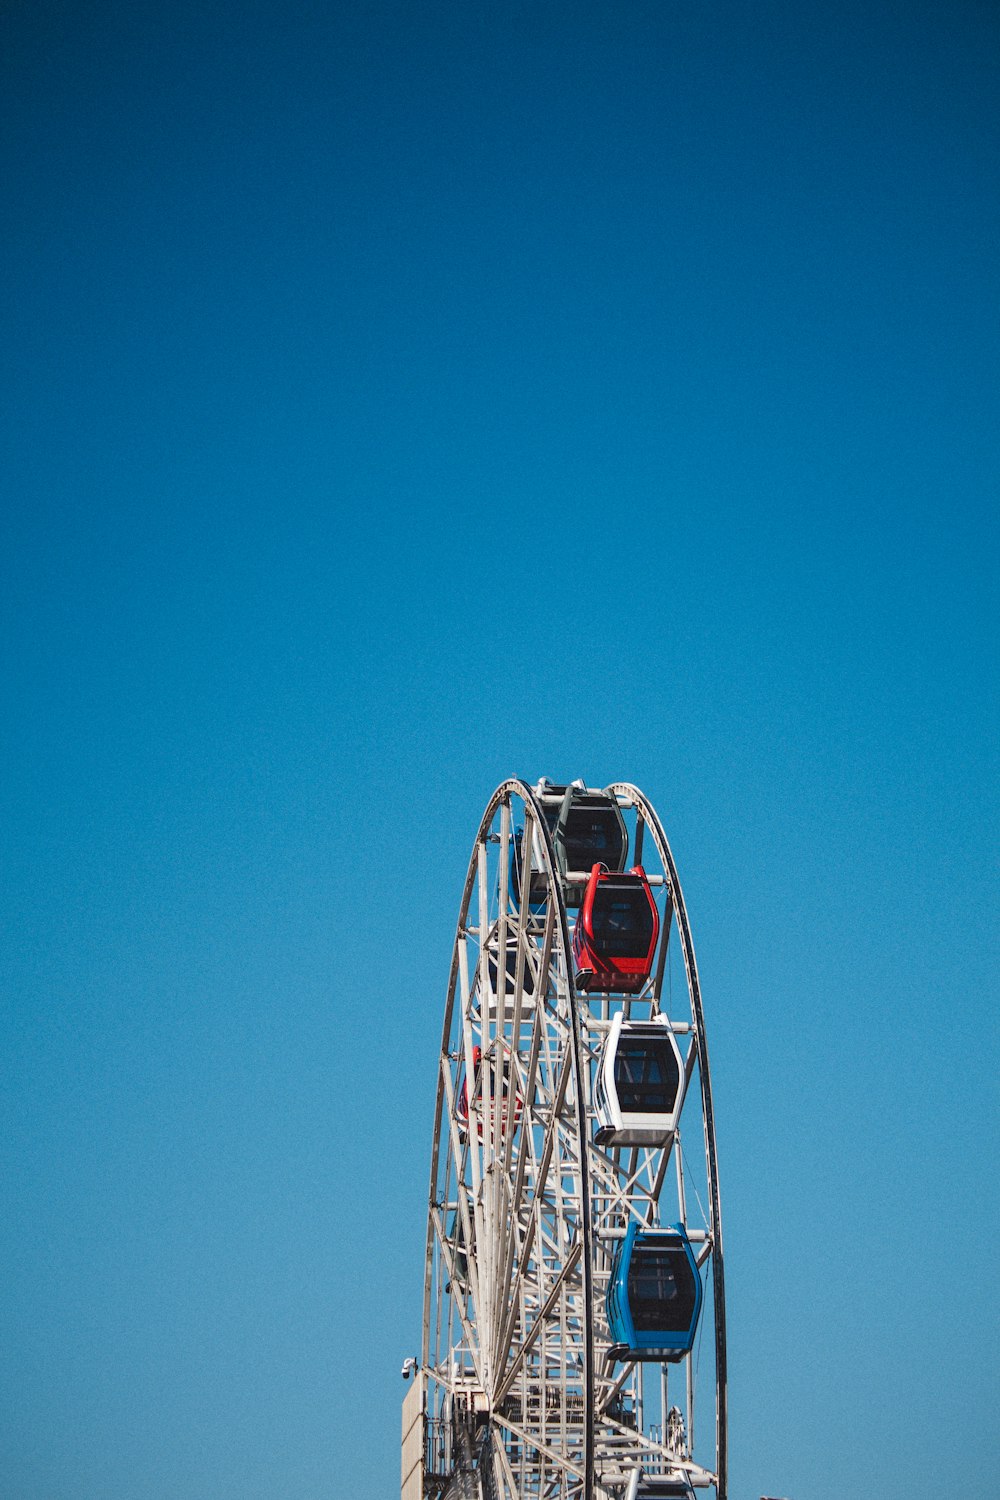 a ferris wheel on a beach with a blue sky in the background